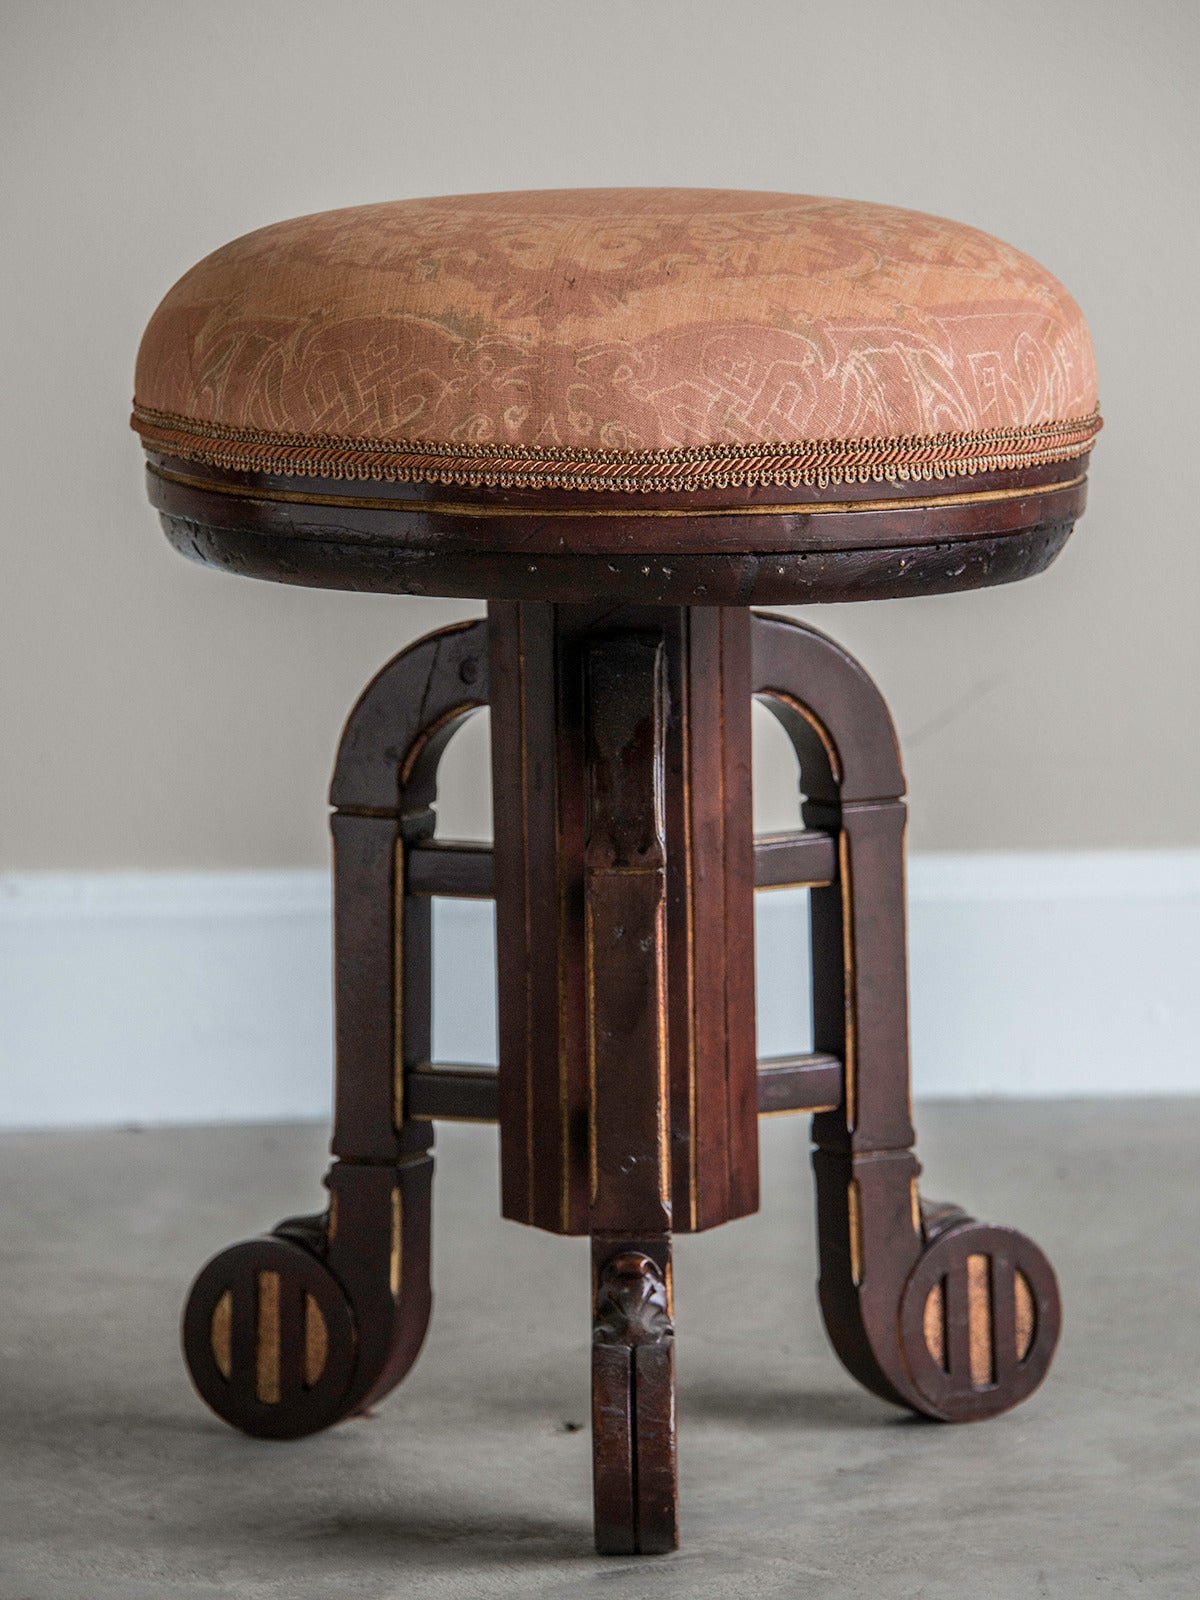 Art Deco Period Mahogany Gilded Stool, Vienna, Austria c.1930. The balanced and symmetrical appearance of this stool is enhanced by the use of a circular seat that echoes the circular feet that support the stool. Each leg and foot has the mahogany